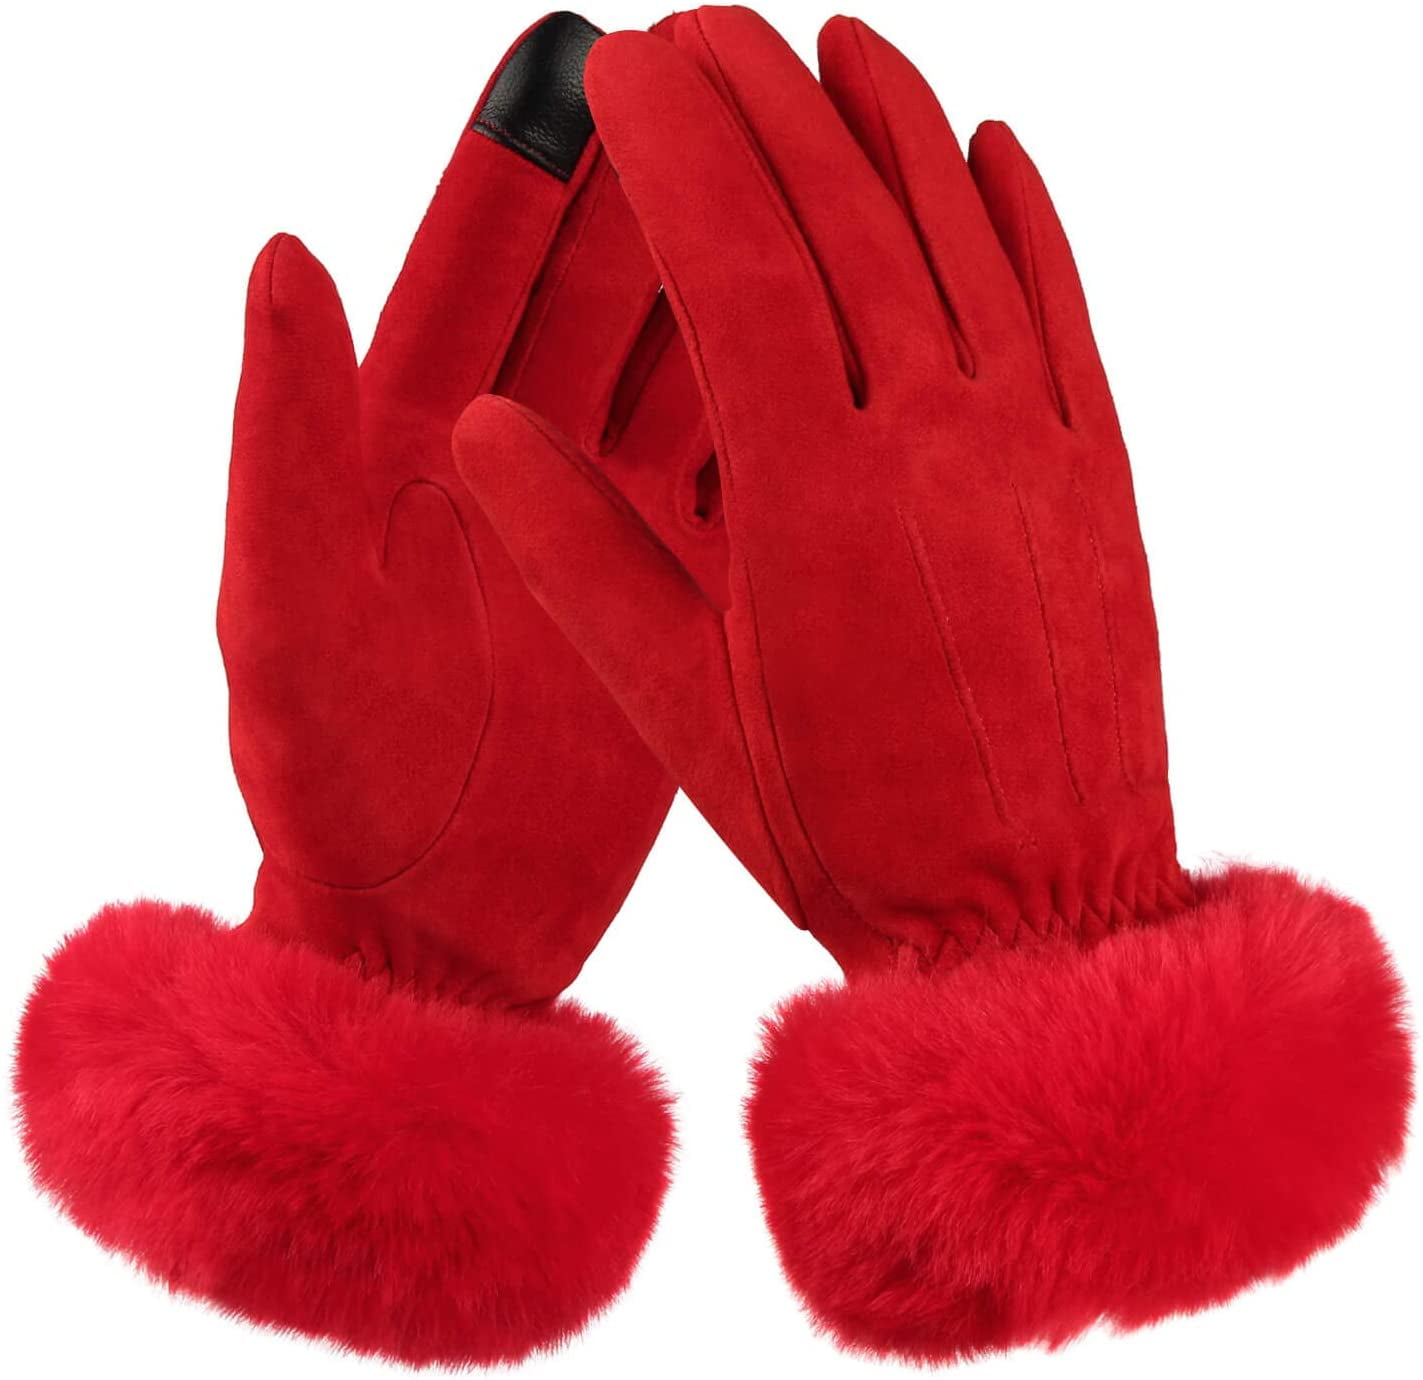 Womens 100% Leather Winter Gloves With Fur Trim Fleece Lined Ladies Warm Christmas Gift Different Colours 